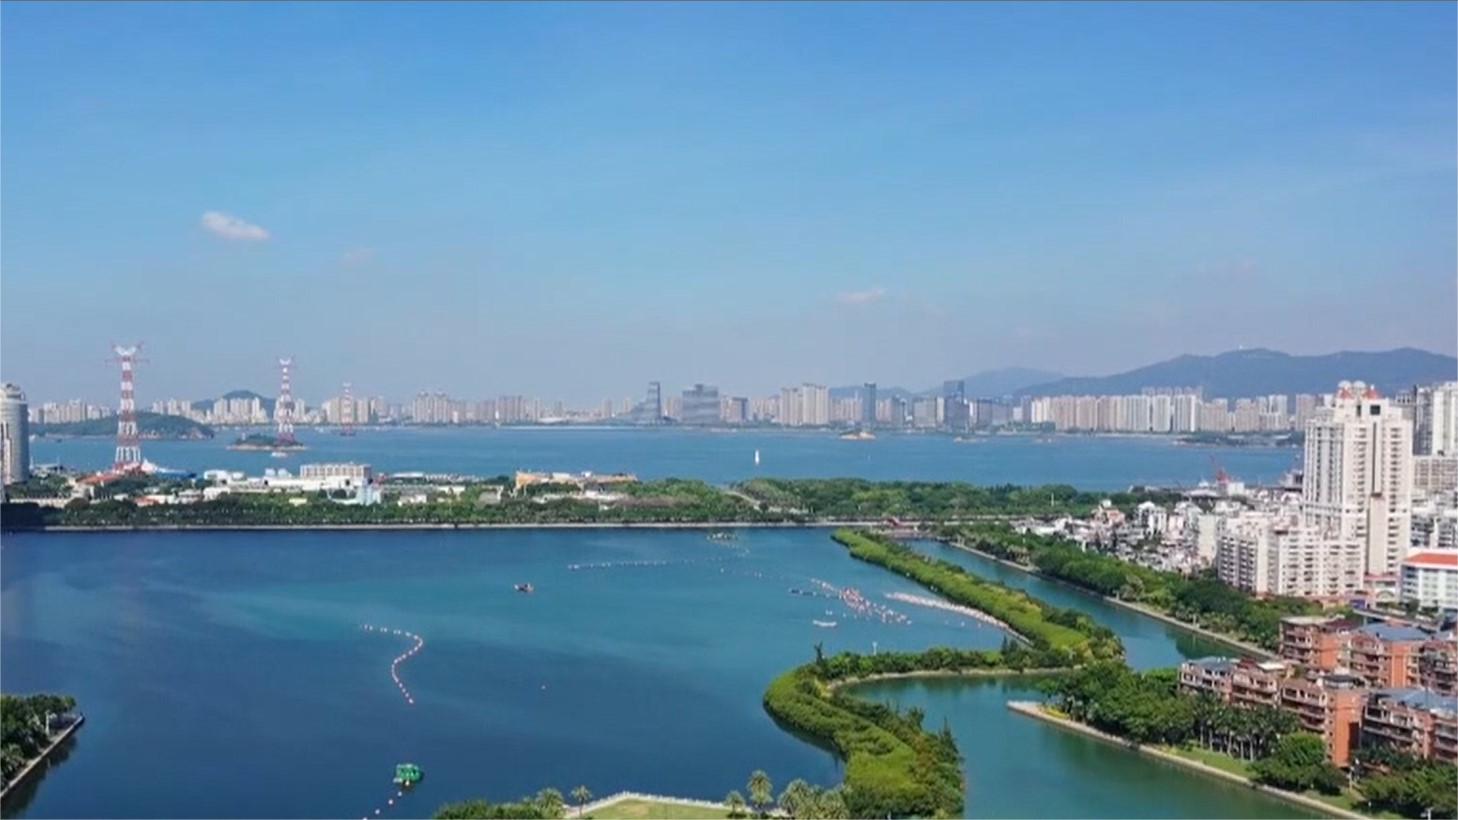 Yundang Lake's remarkable transformation: From polluted past to scenic treasure